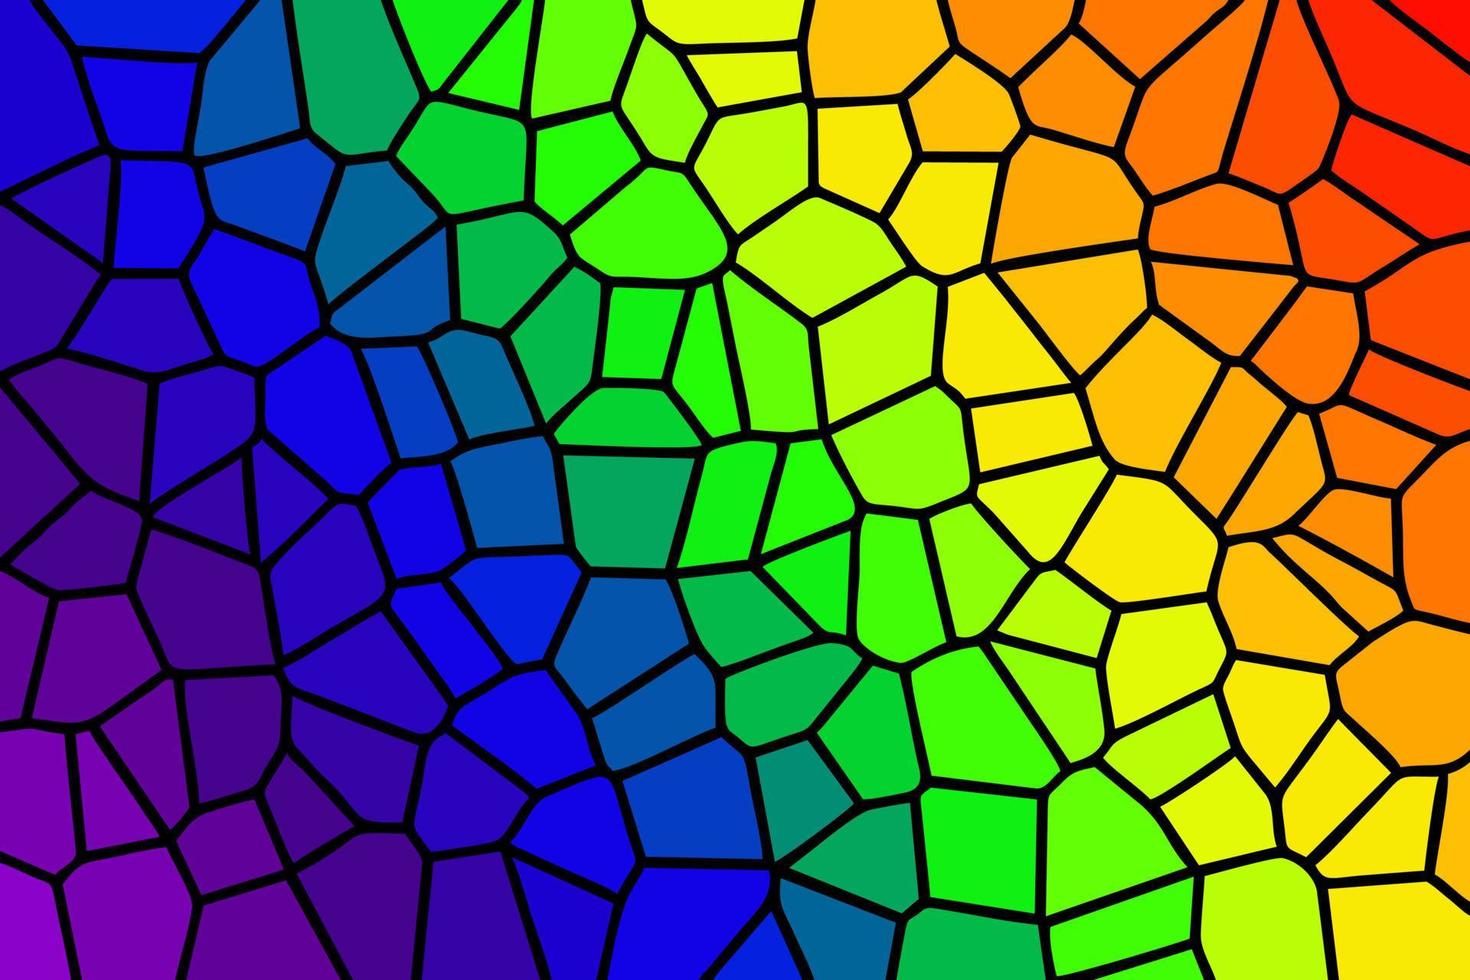 Rainbow Stained Glass Pattern... vector